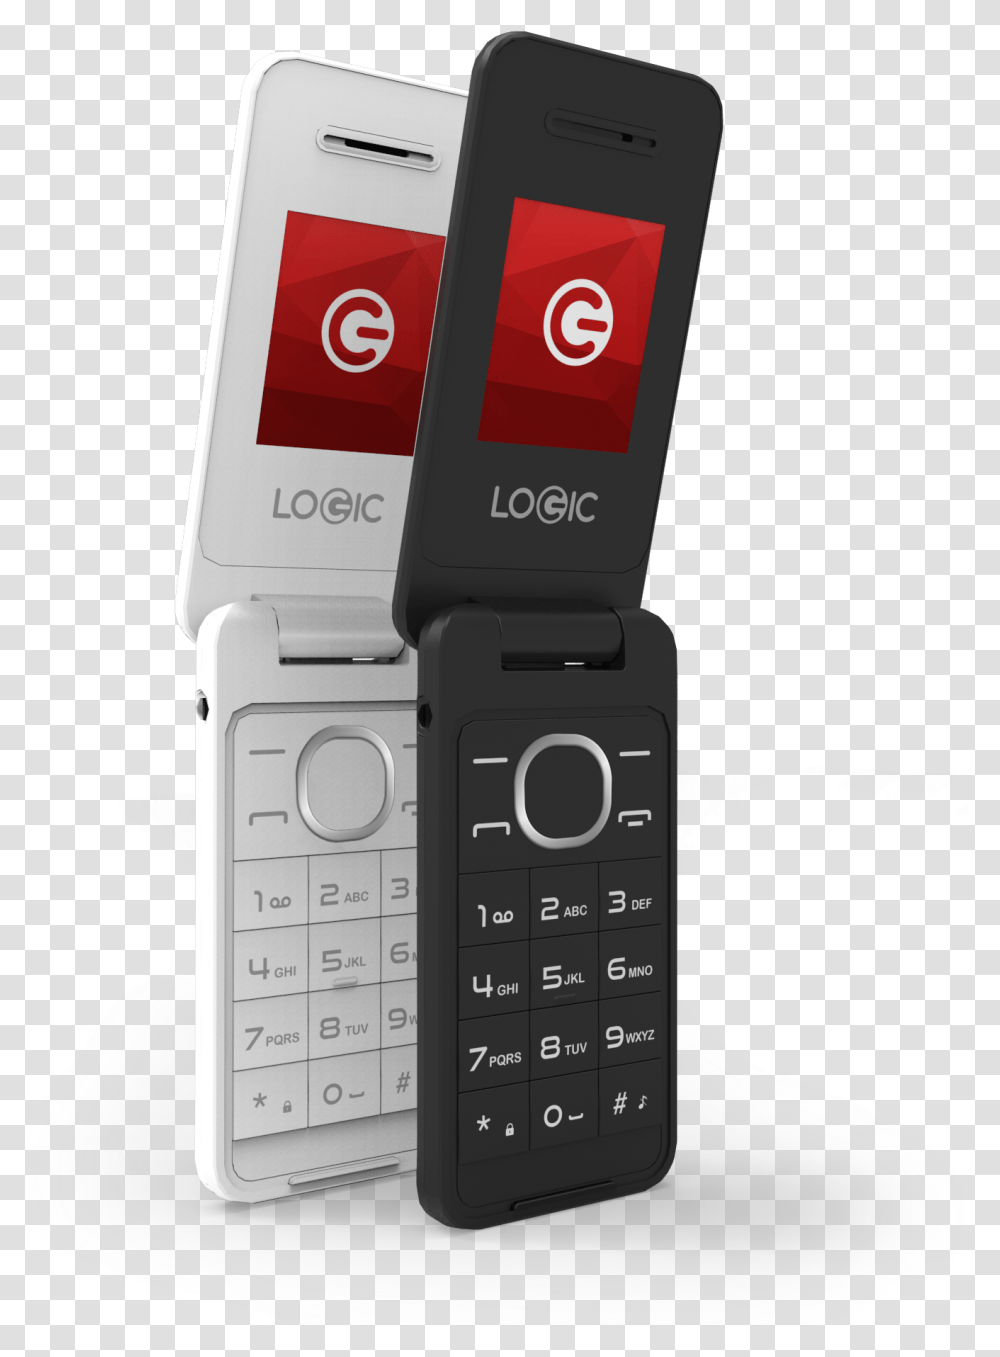 Img1 Telefonos Con Teclas Y Tapita, Mobile Phone, Electronics, Cell Phone, Iphone Transparent Png